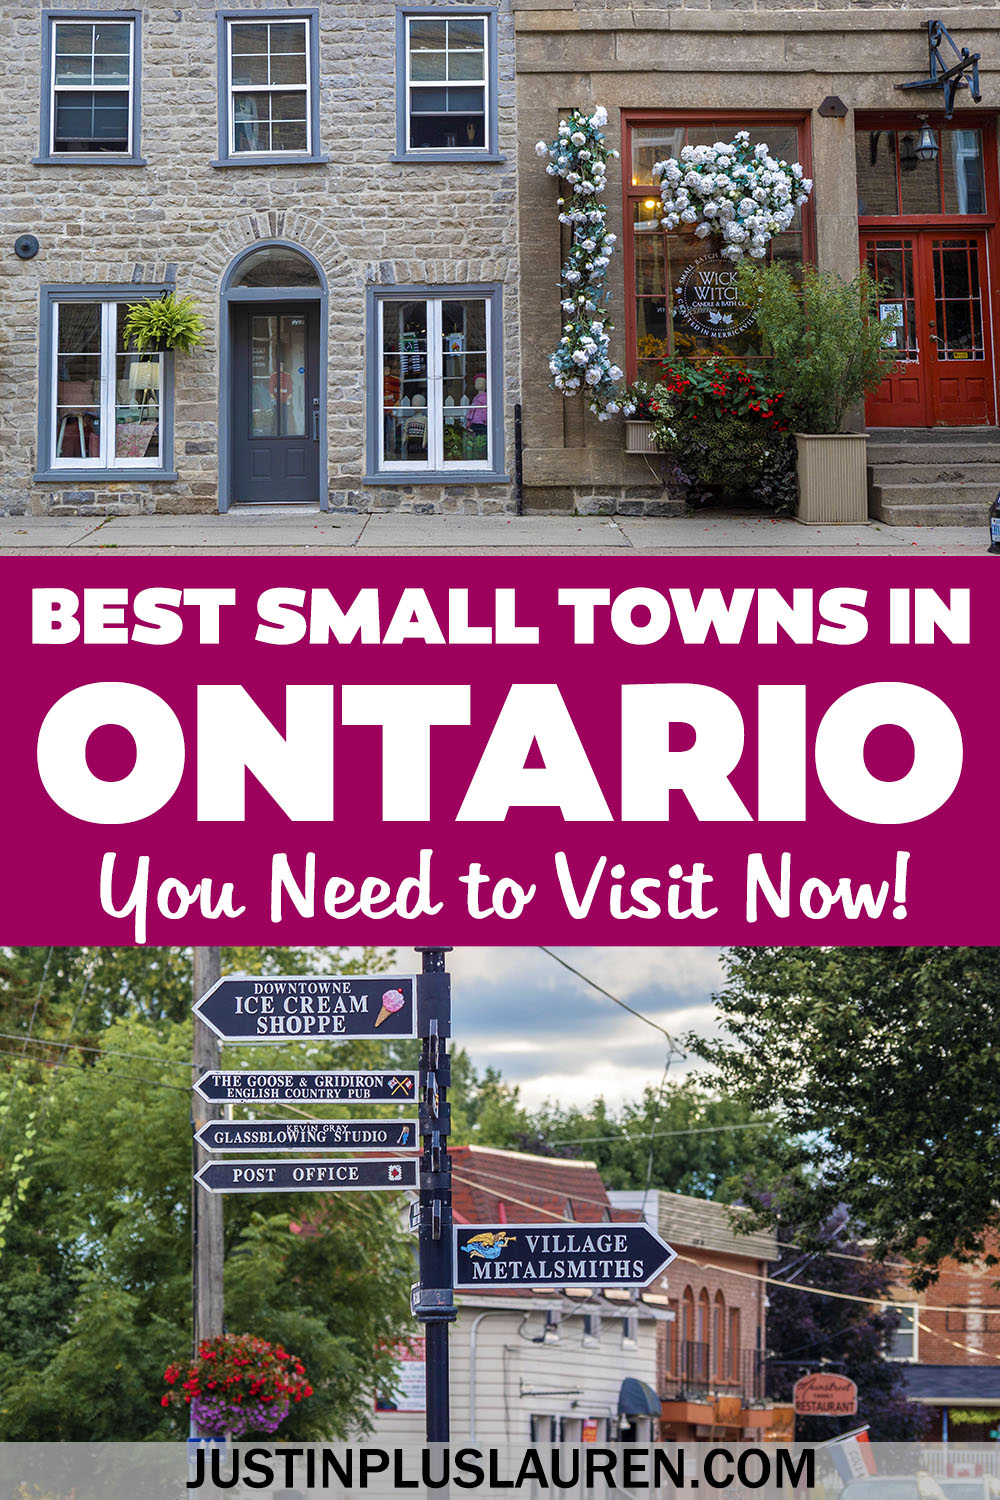 These are the best small towns in Ontario you need to visit. These are the prettiest towns in Ontario that you'll love to see.